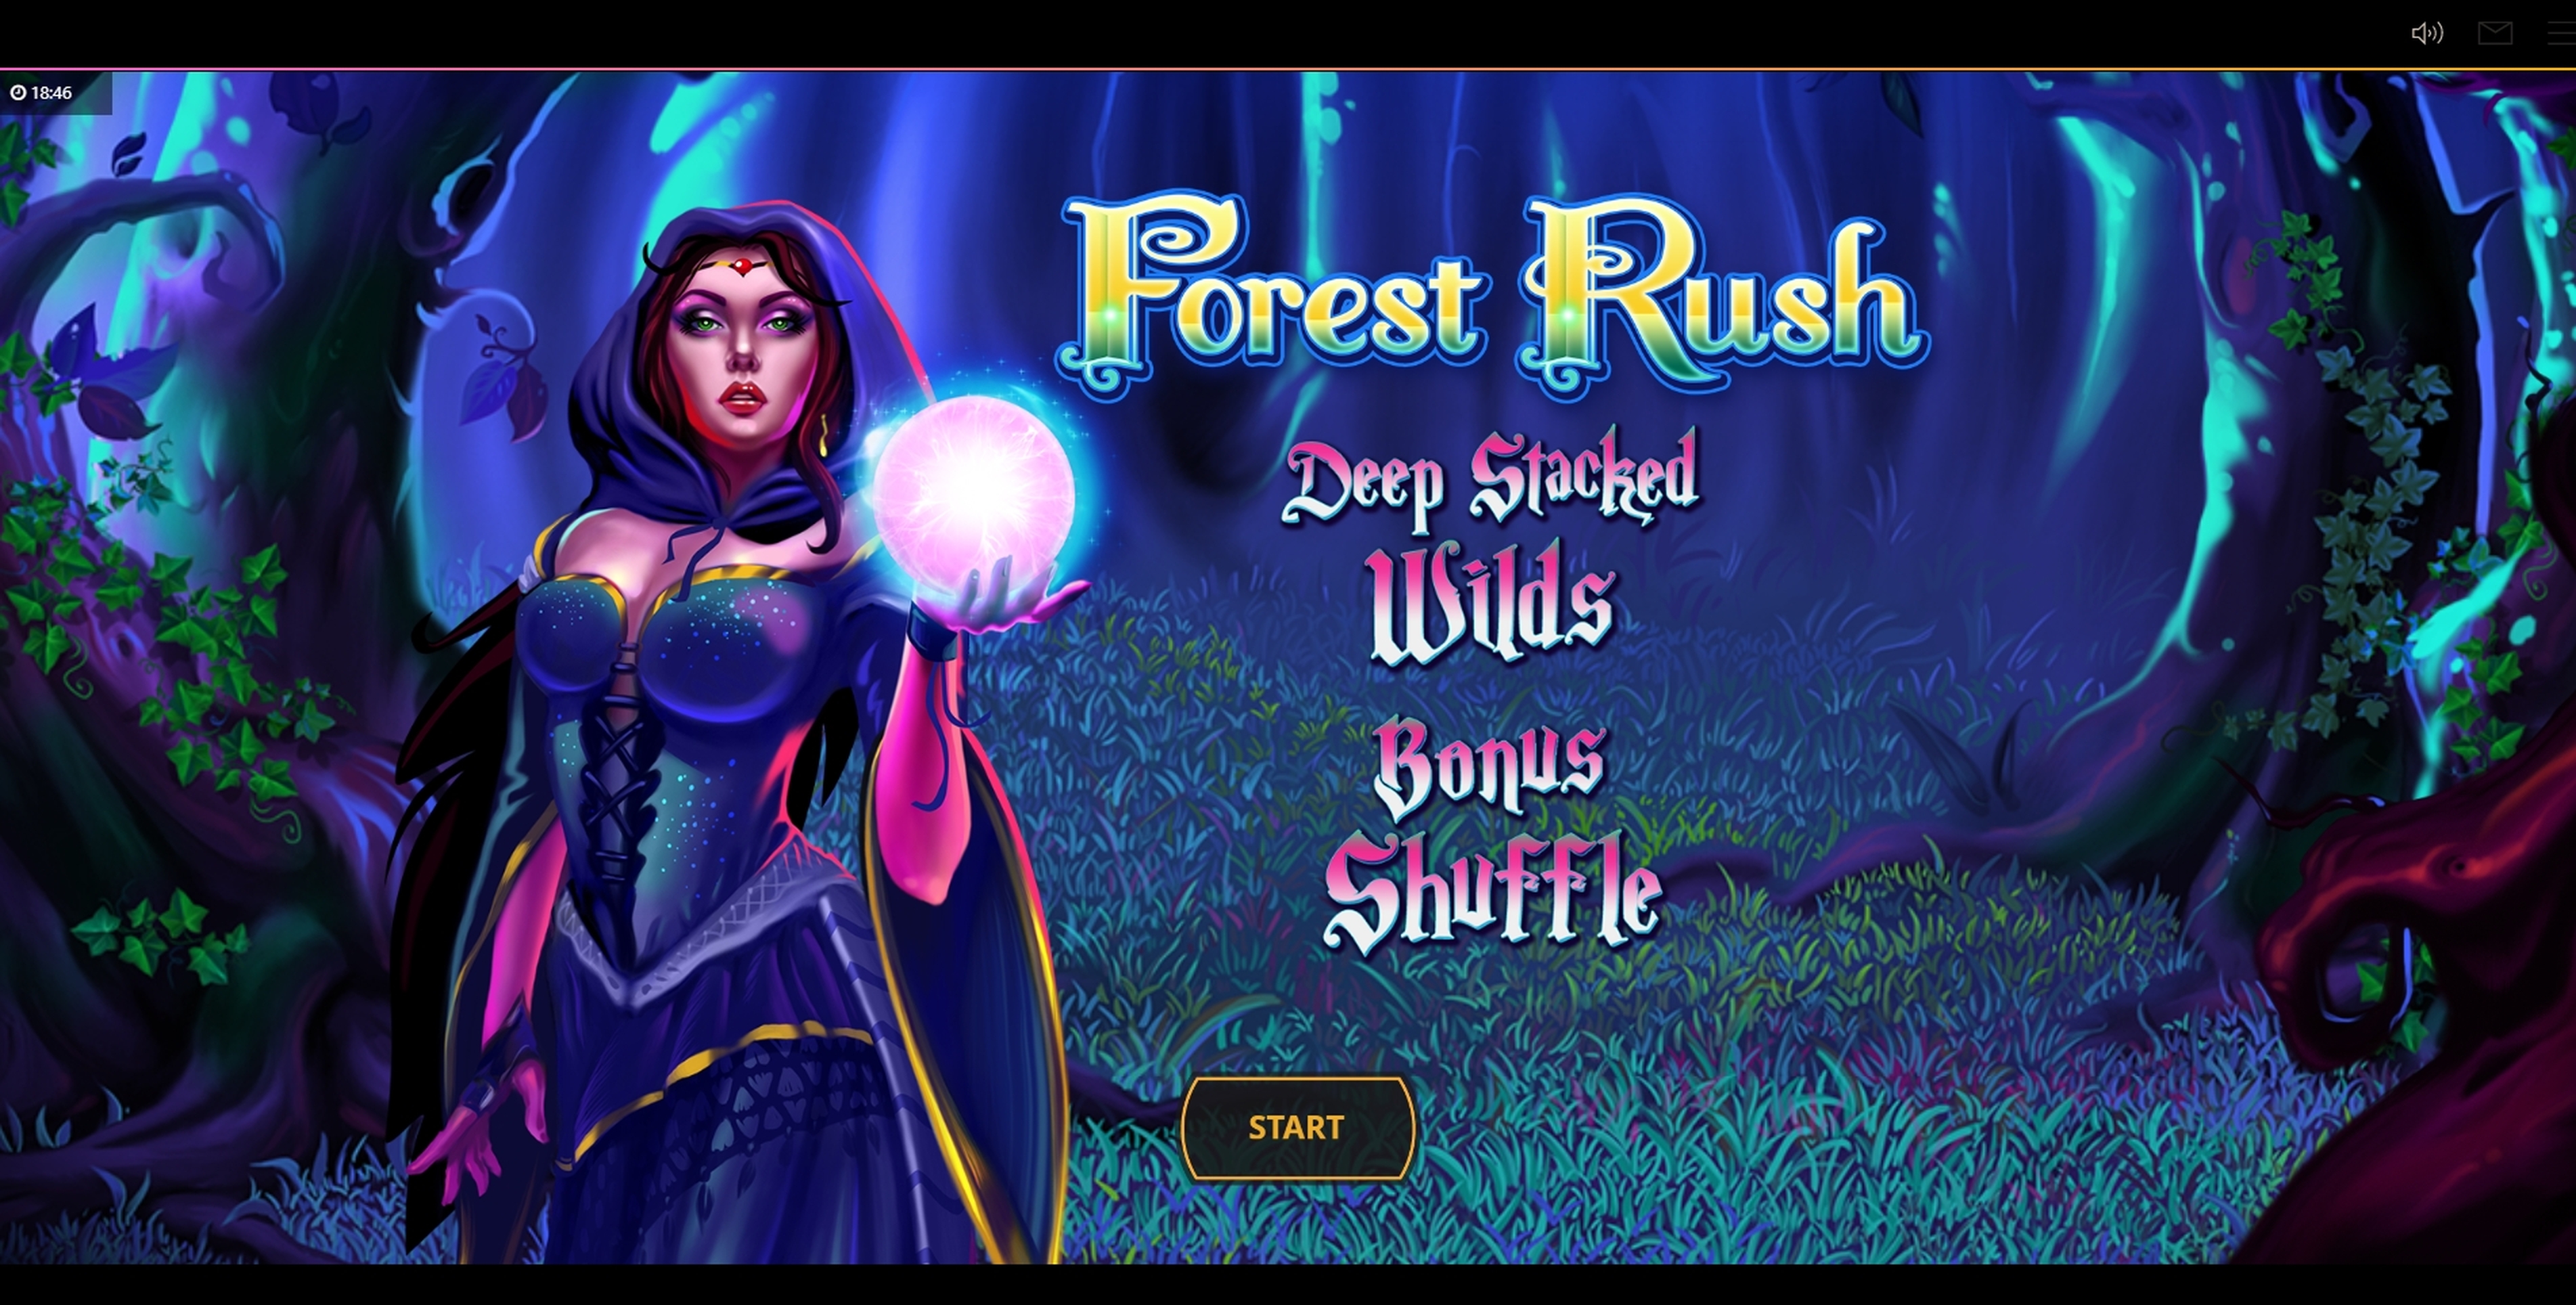 Play Forest Rush Free Casino Slot Game by Cayetano Gaming